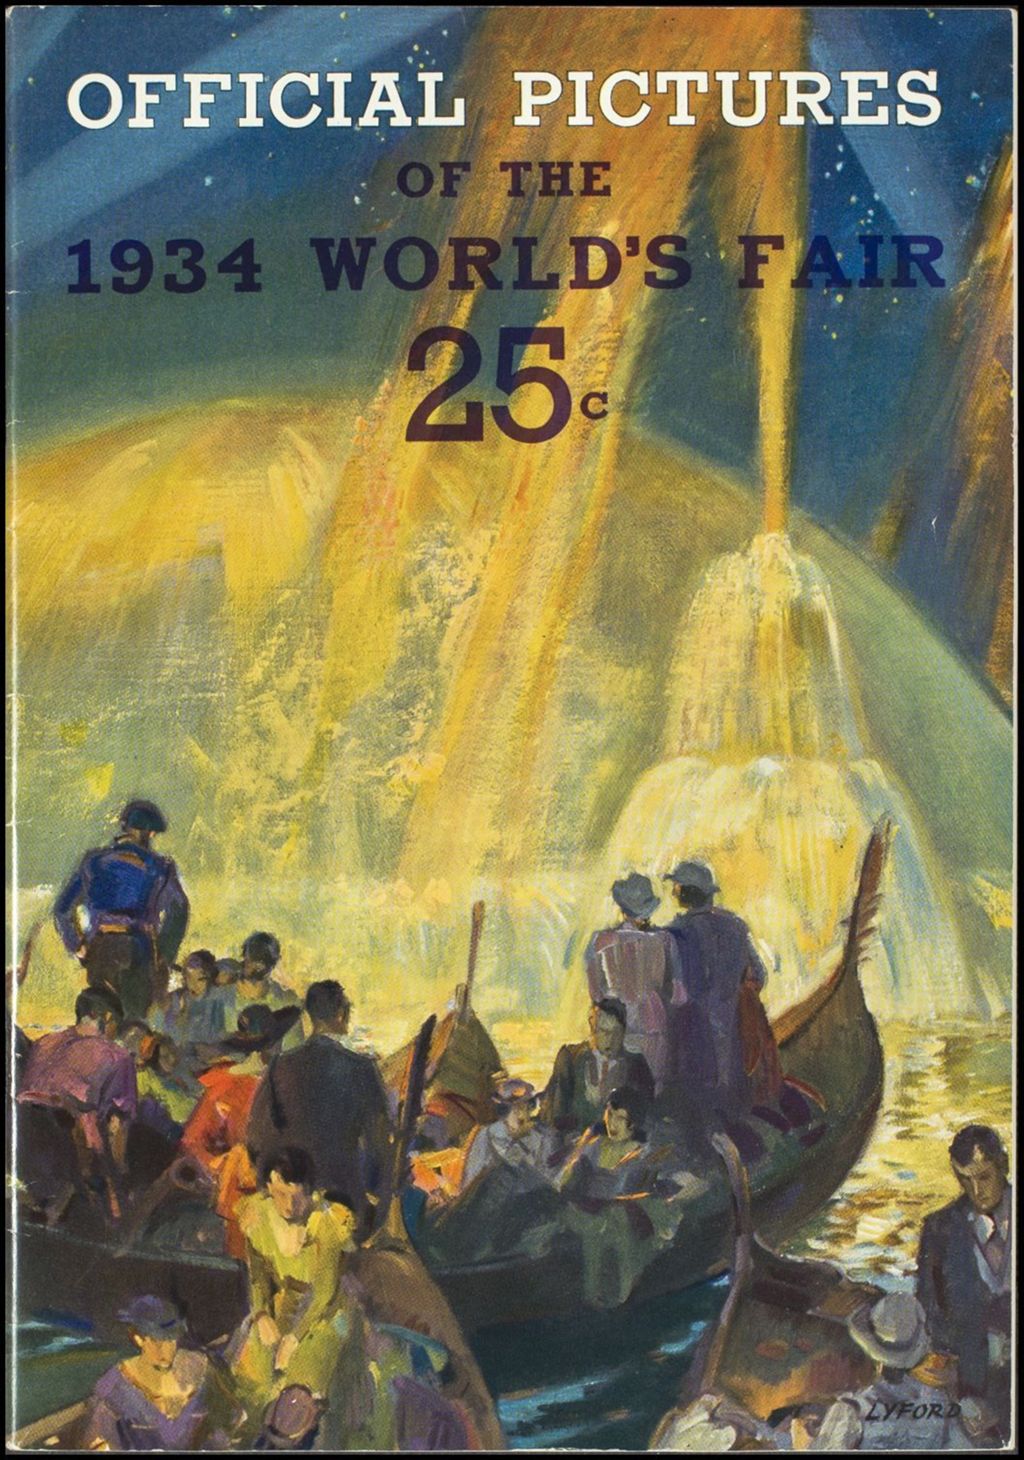 The official pictures of the 1934 world's fair (Folder 16-201)